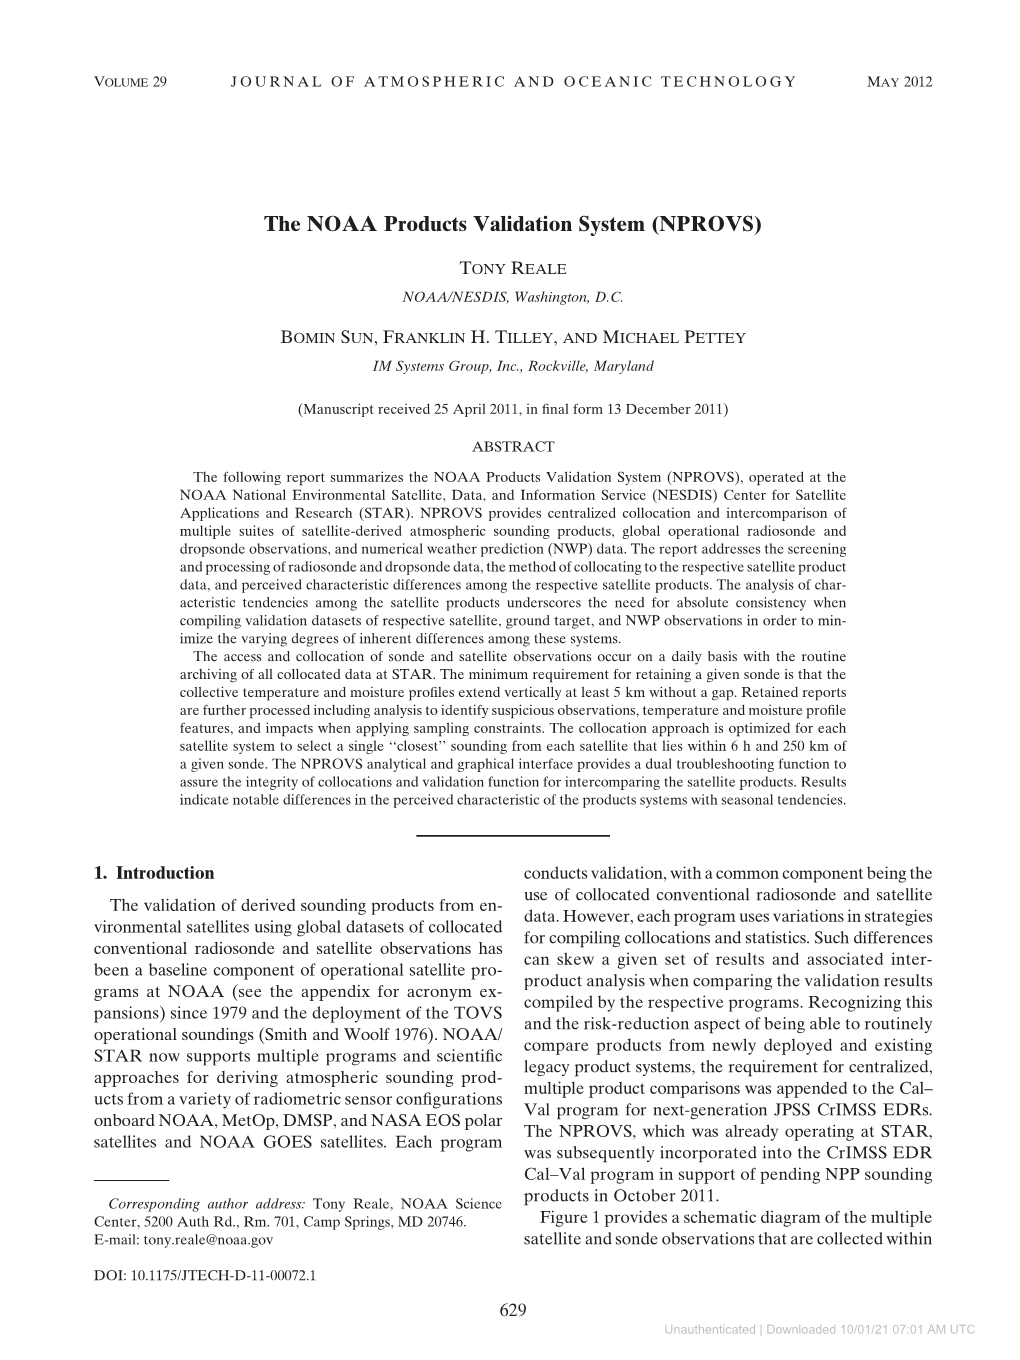 The NOAA Products Validation System (NPROVS)